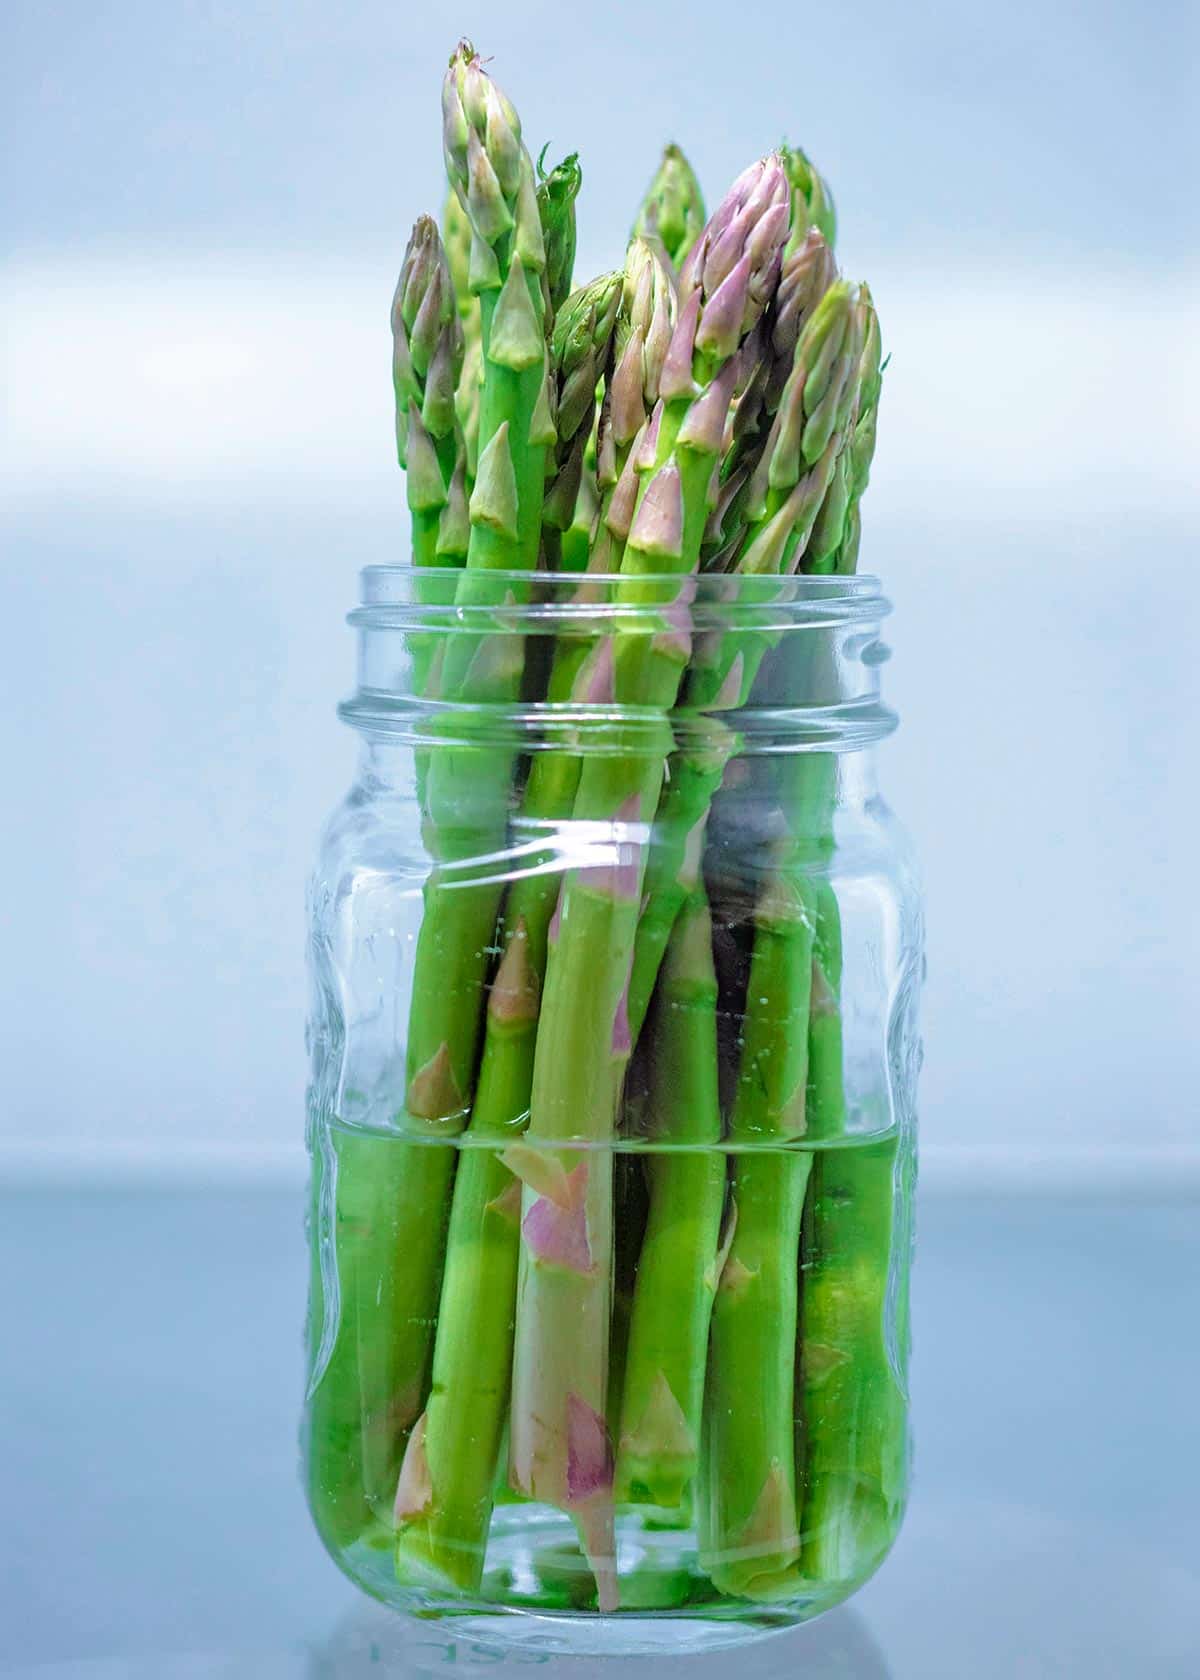 Asparagus spears stood in a jar of water.